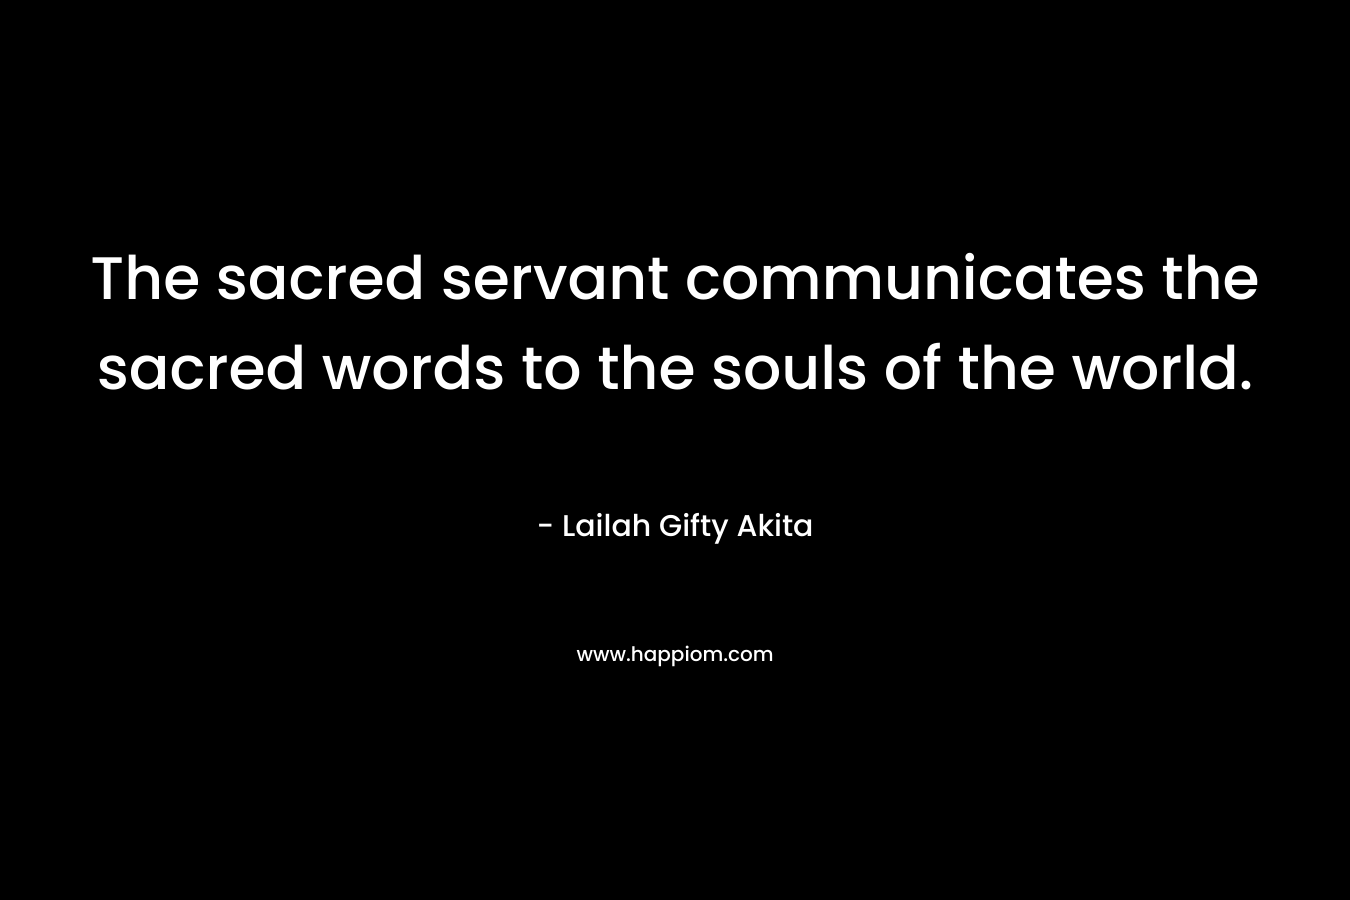 The sacred servant communicates the sacred words to the souls of the world.